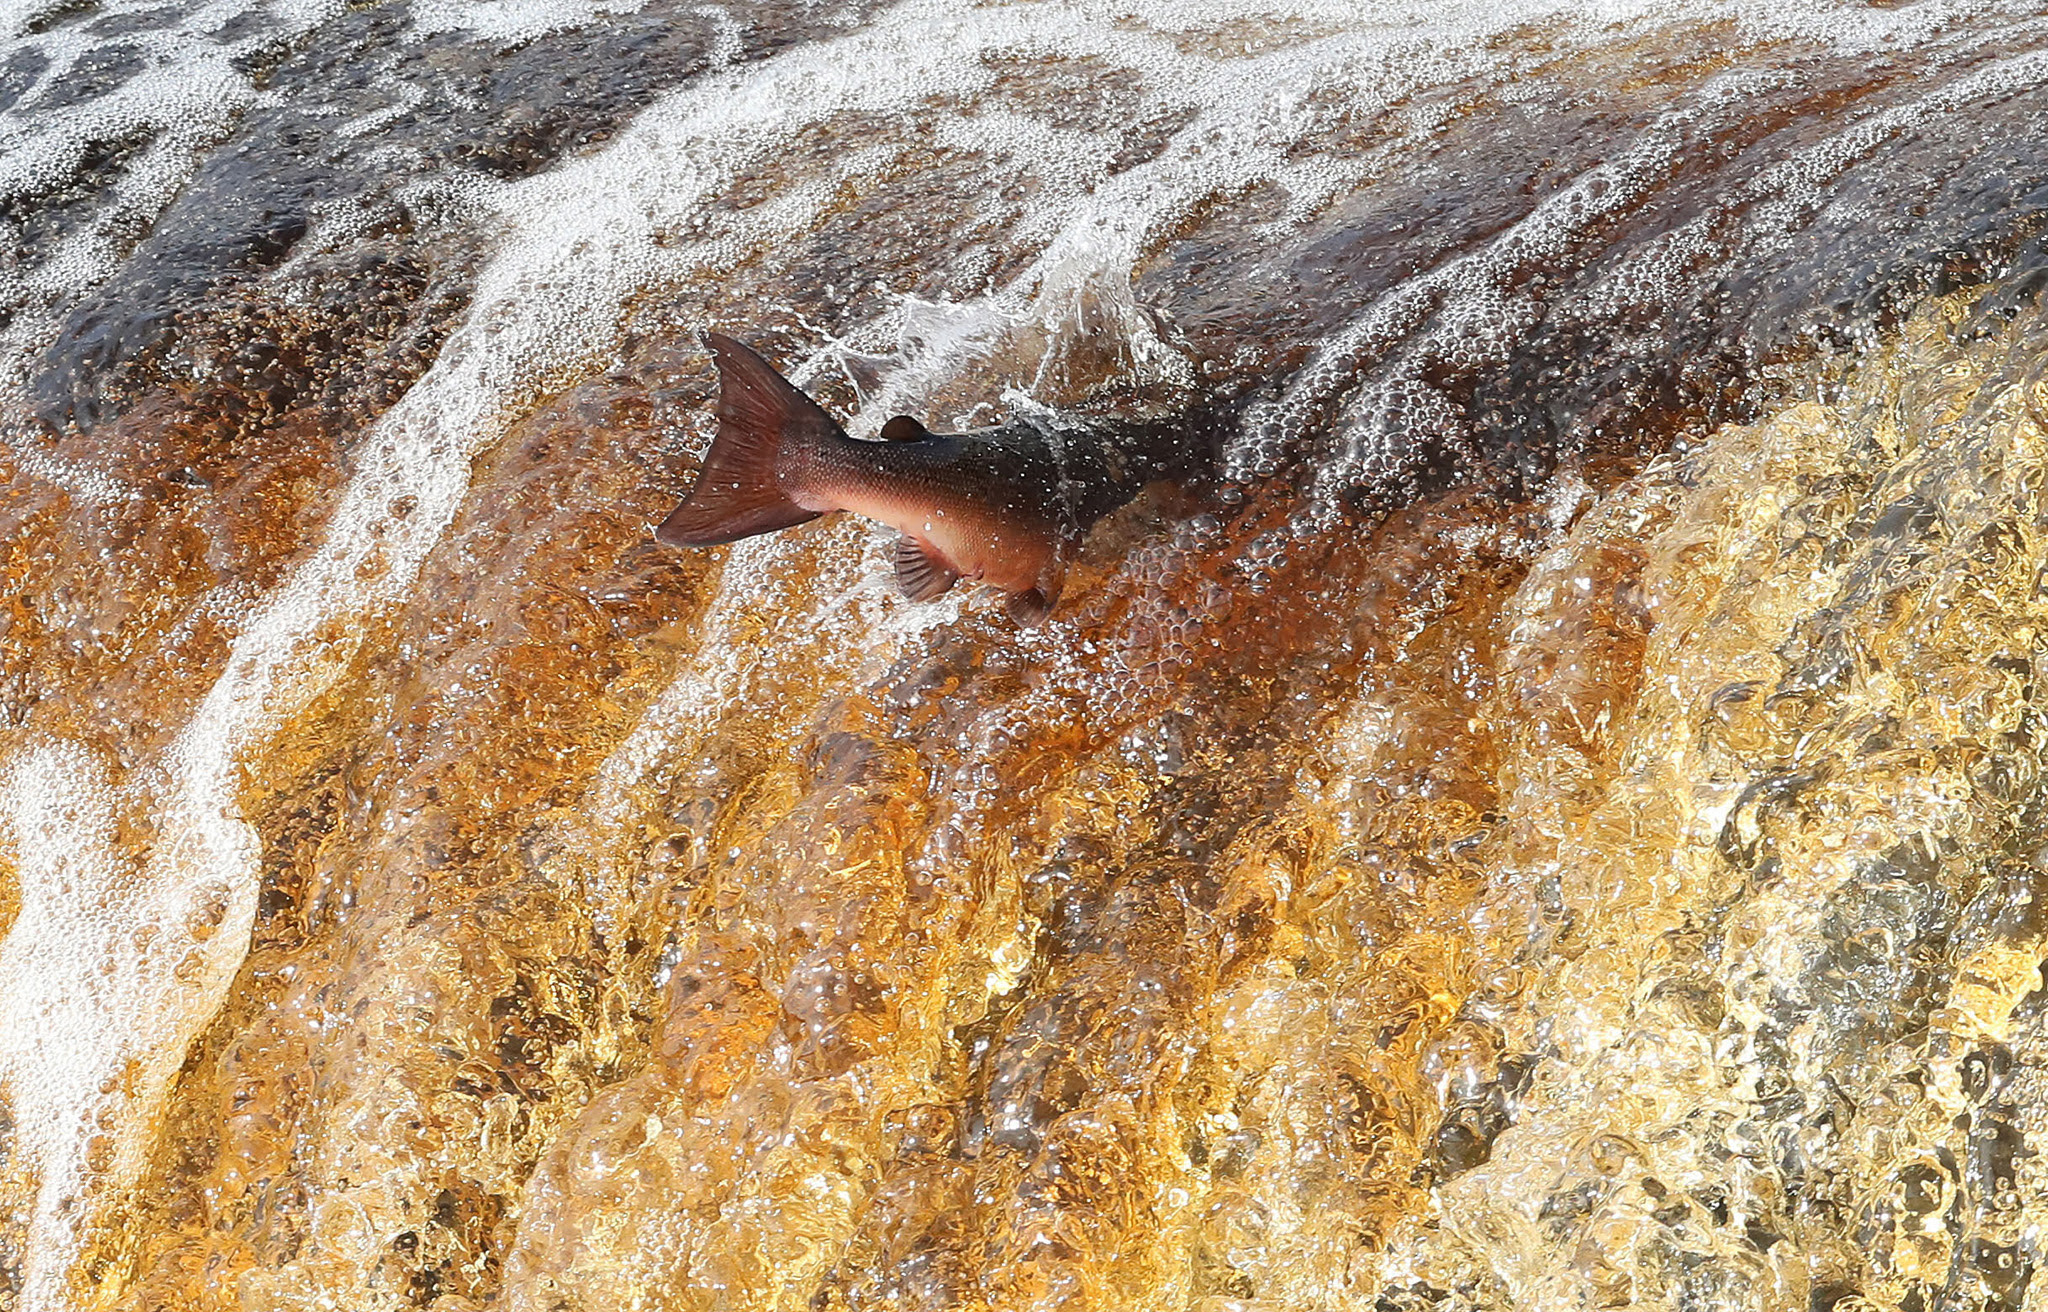 A salmon makes its way upstream on the River Tyne in Hexham, as tens of thousands of the fish have been helped by a new fish pass in a once in a lifetime journey to spawn. PRESS ASSOCIATION Photo. Picture date: Tuesday October 18, 2016. Along with thousands of sea trout, the fish swim up from the sea so they can lay their eggs in the tributaries of the river. See PA story ENVIRONMENT Salmon. Photo credit should read: Owen Humphreys/PA Wire